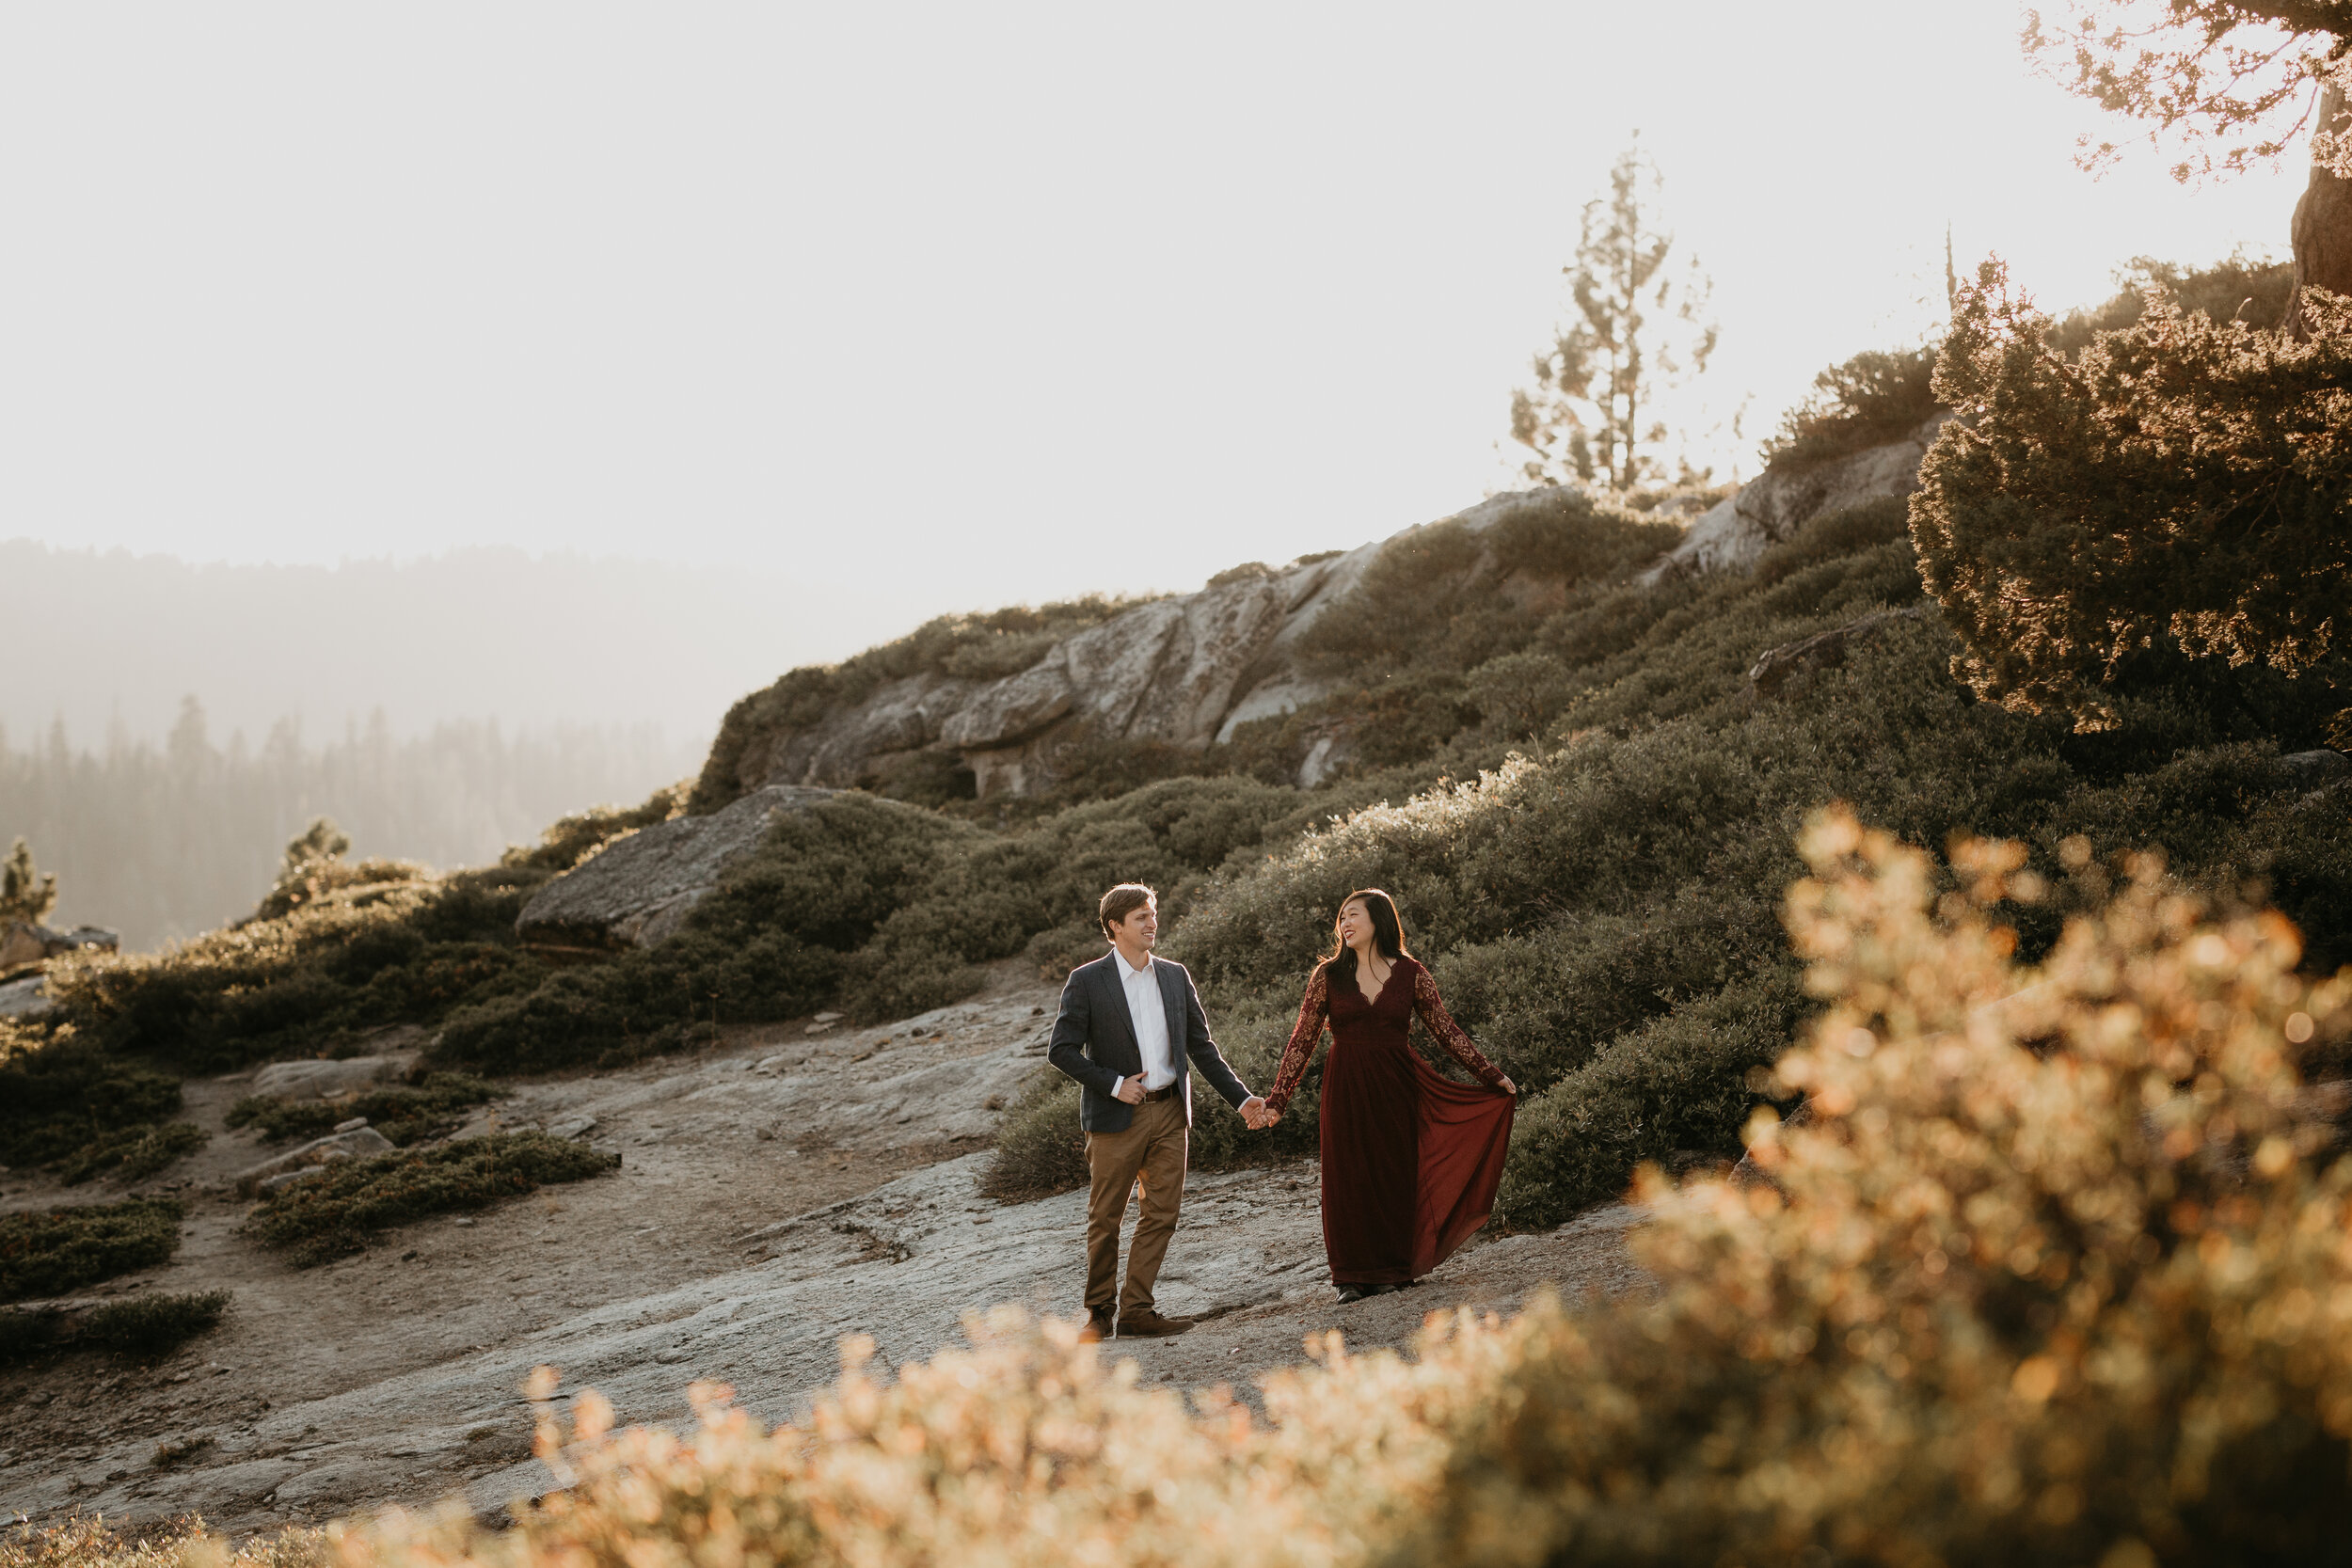 yosemite-national-park-couples-session-at-taft-point-and-yosemite-valley-yosemite-elopement-photographer-nicole-daacke-photography-127.jpg